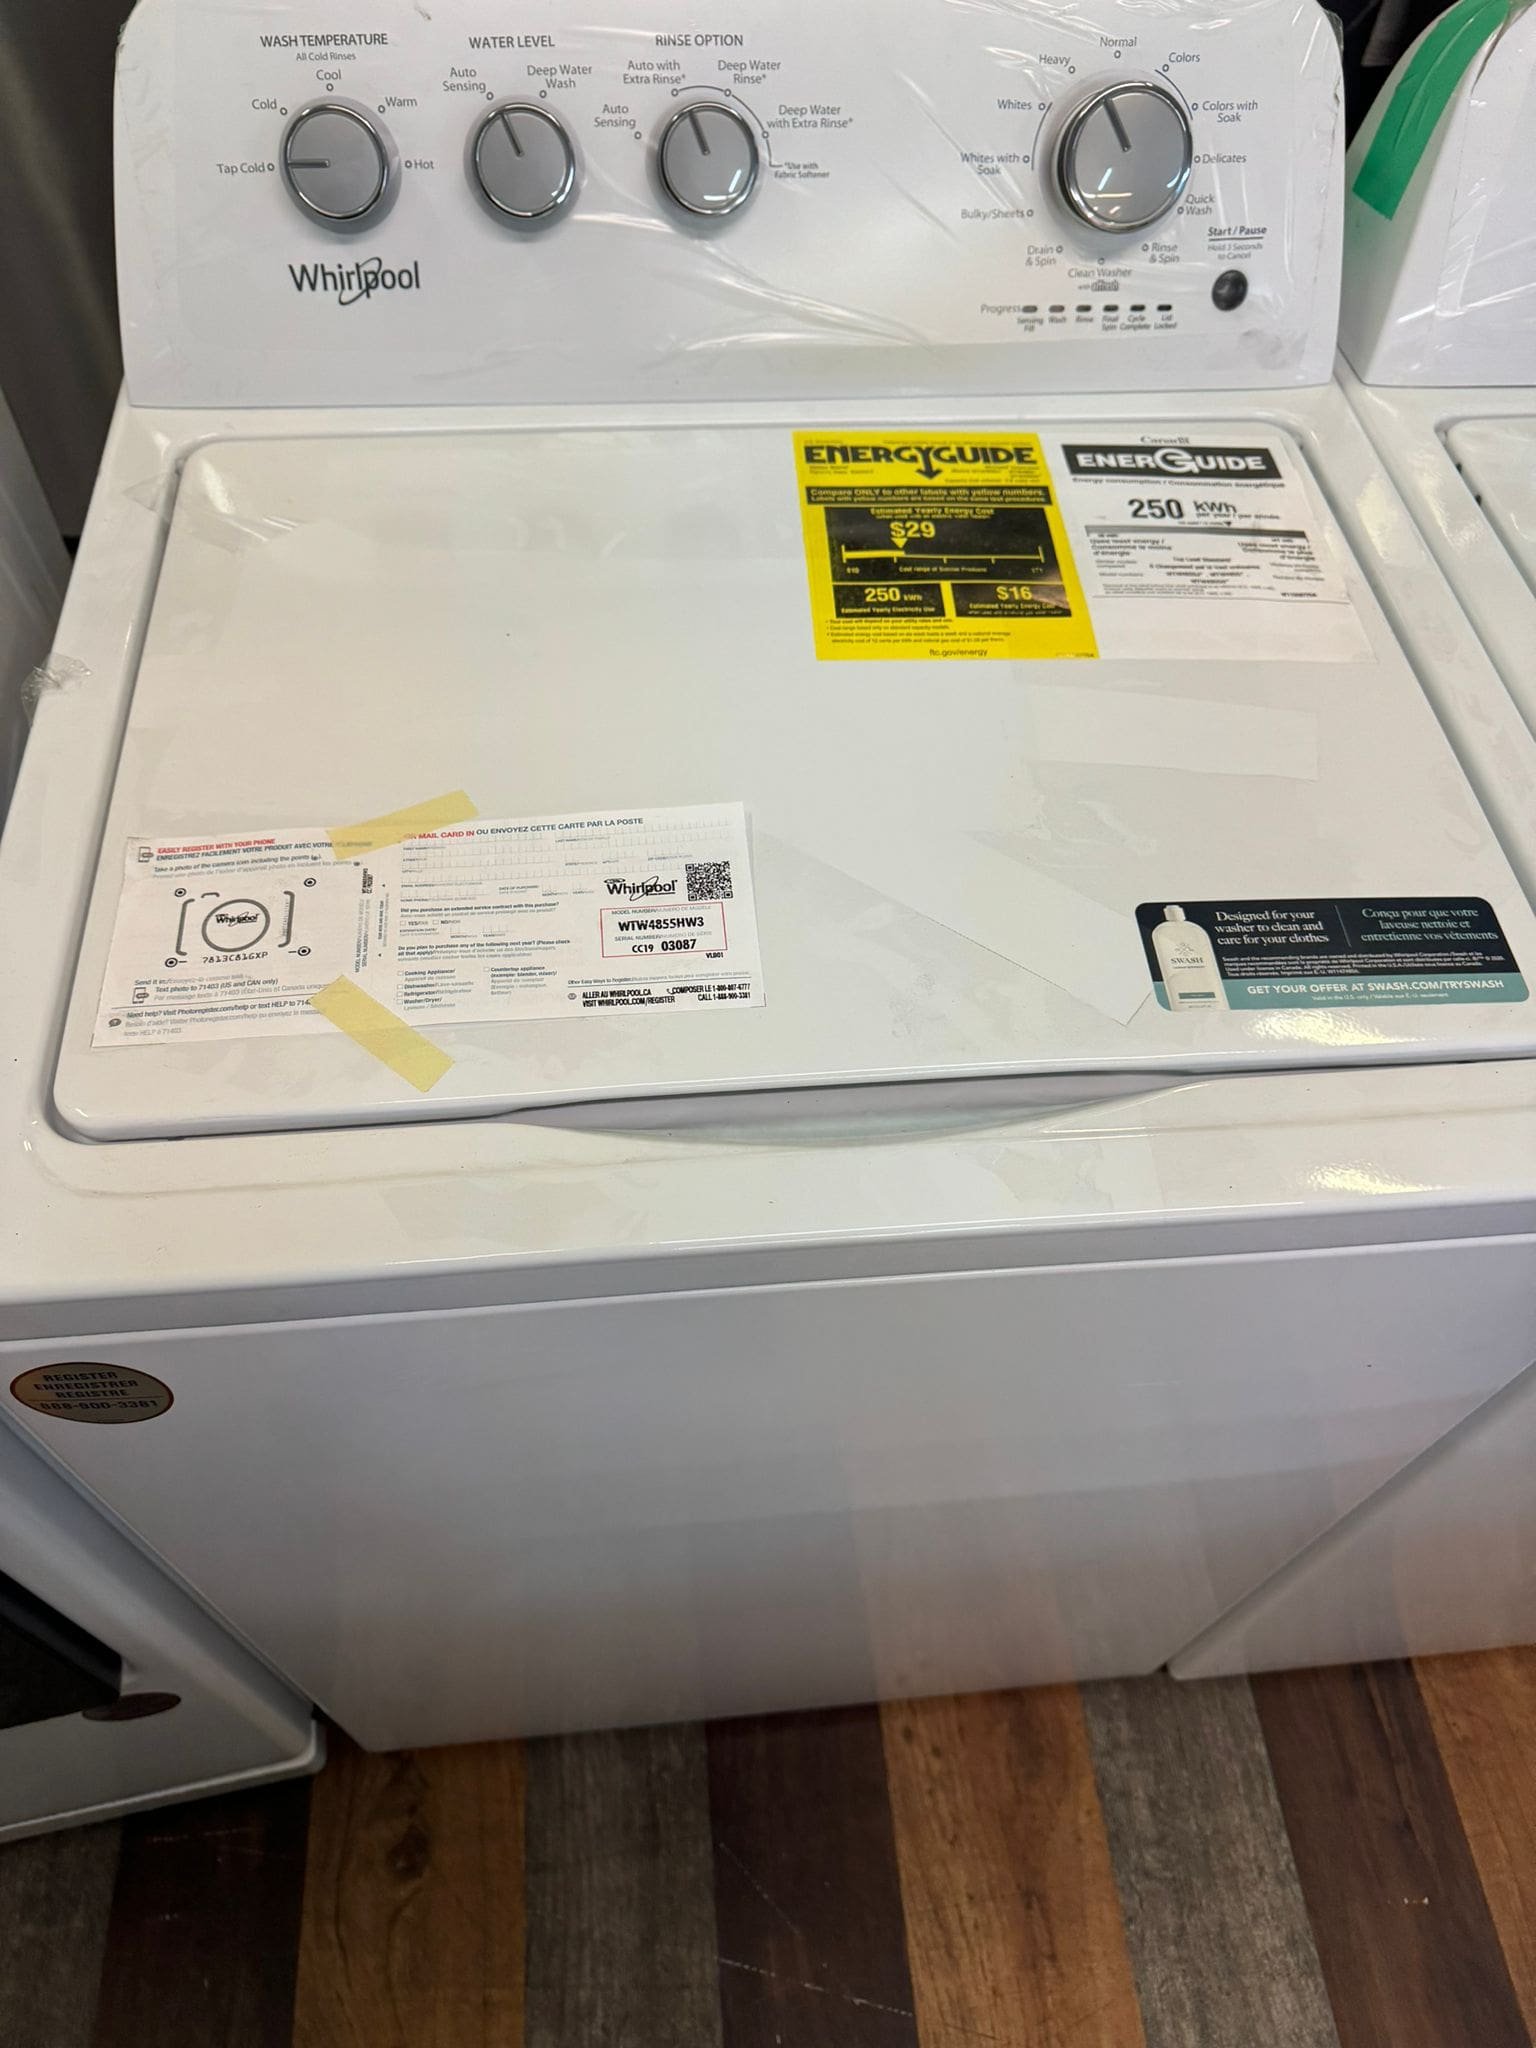 Whirlpool 3.8 cu. ft. Top Load Washer – White